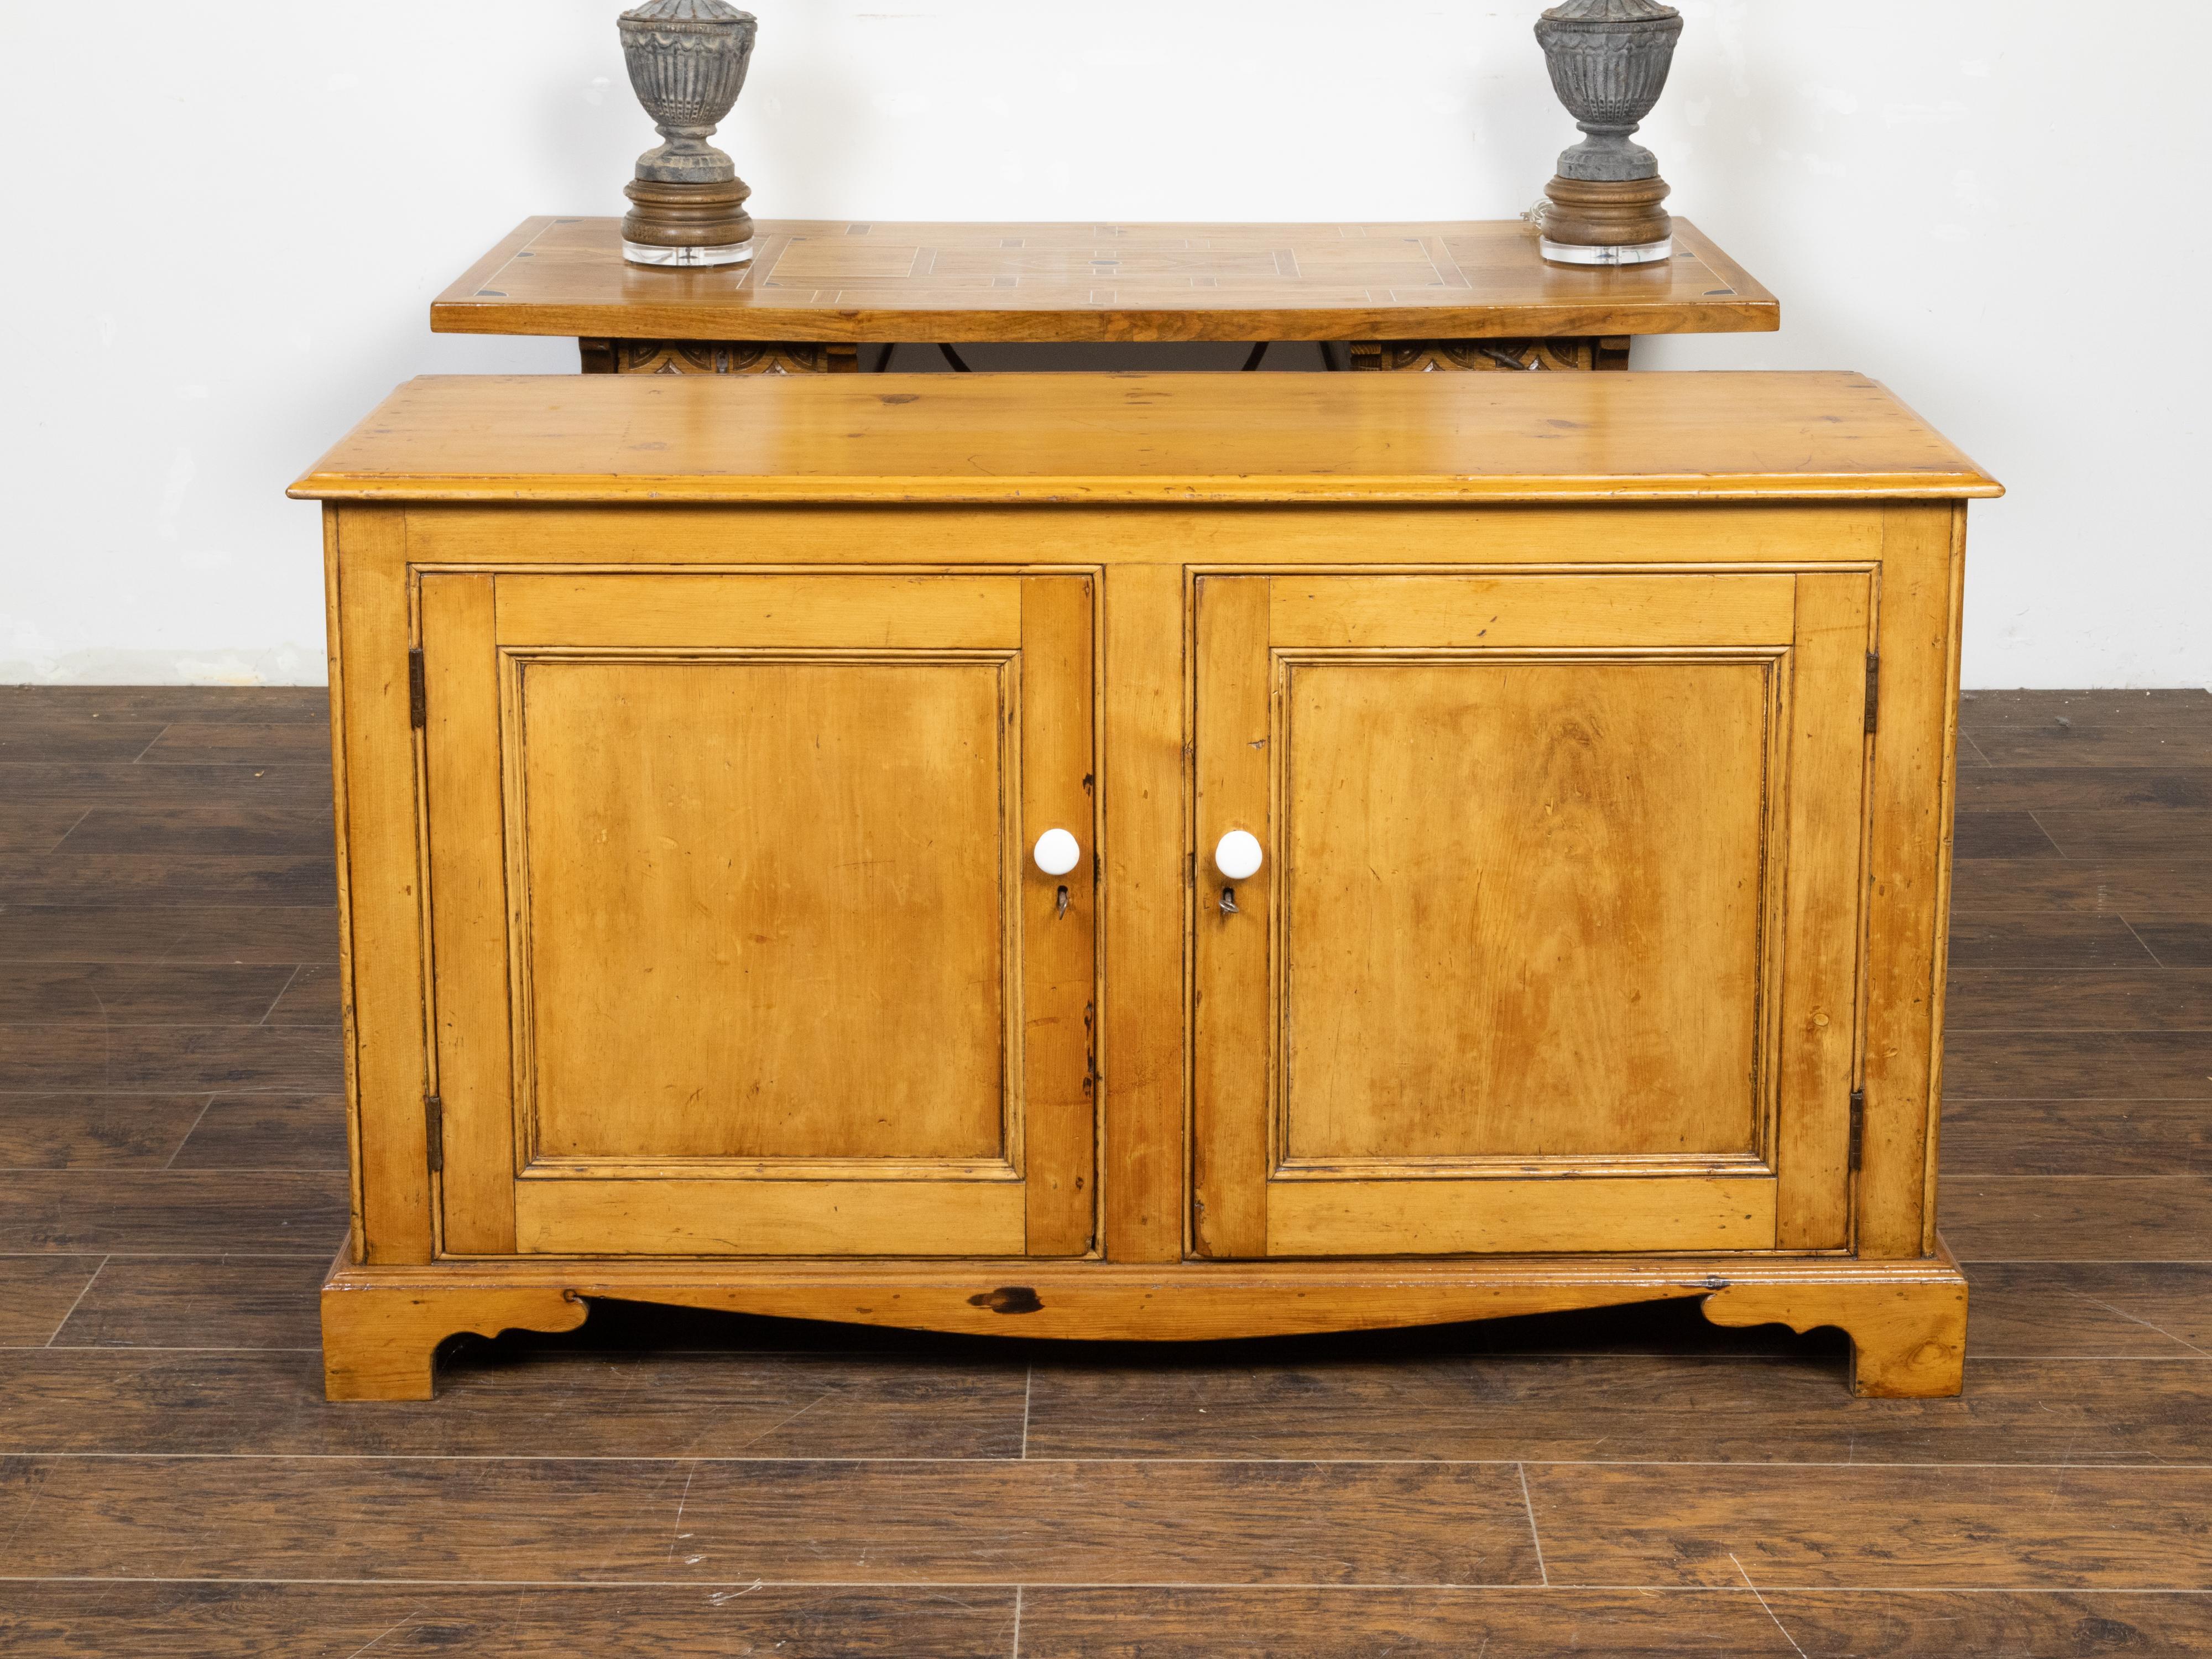 A French pine buffet from the 19th century, with two doors, carved ogee bracket feet, white pulls and nice patina. Created in France during the 19th century, this pine buffet features a rectangular top with beveled edges, sitting above two simple